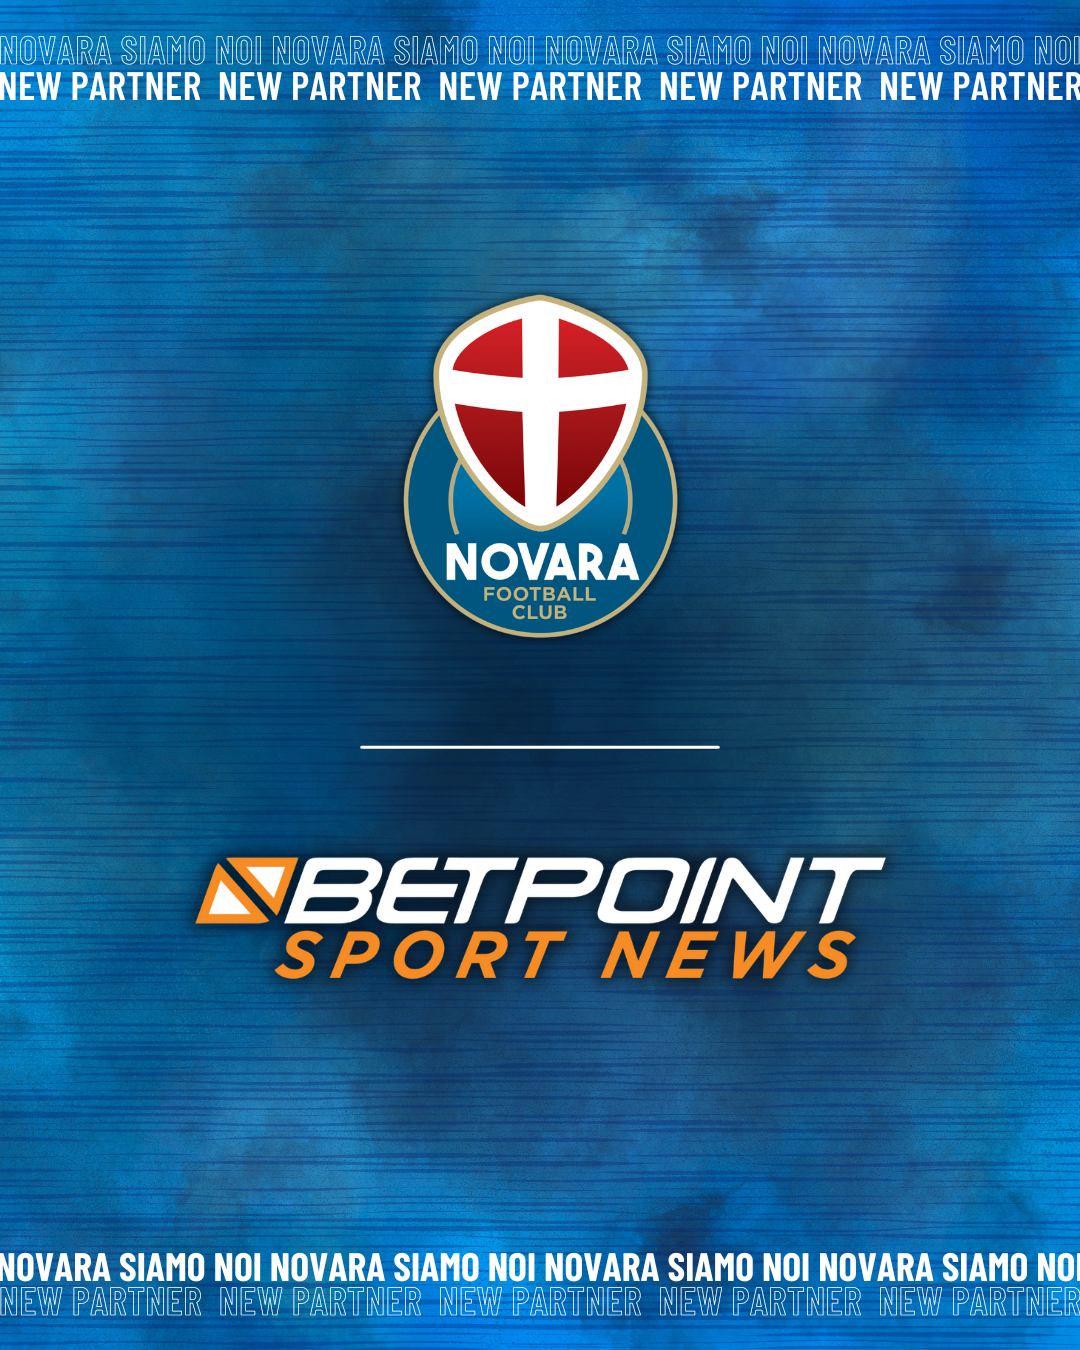 Read more about the article BetpointSport.news nuovo partner del Novara FC